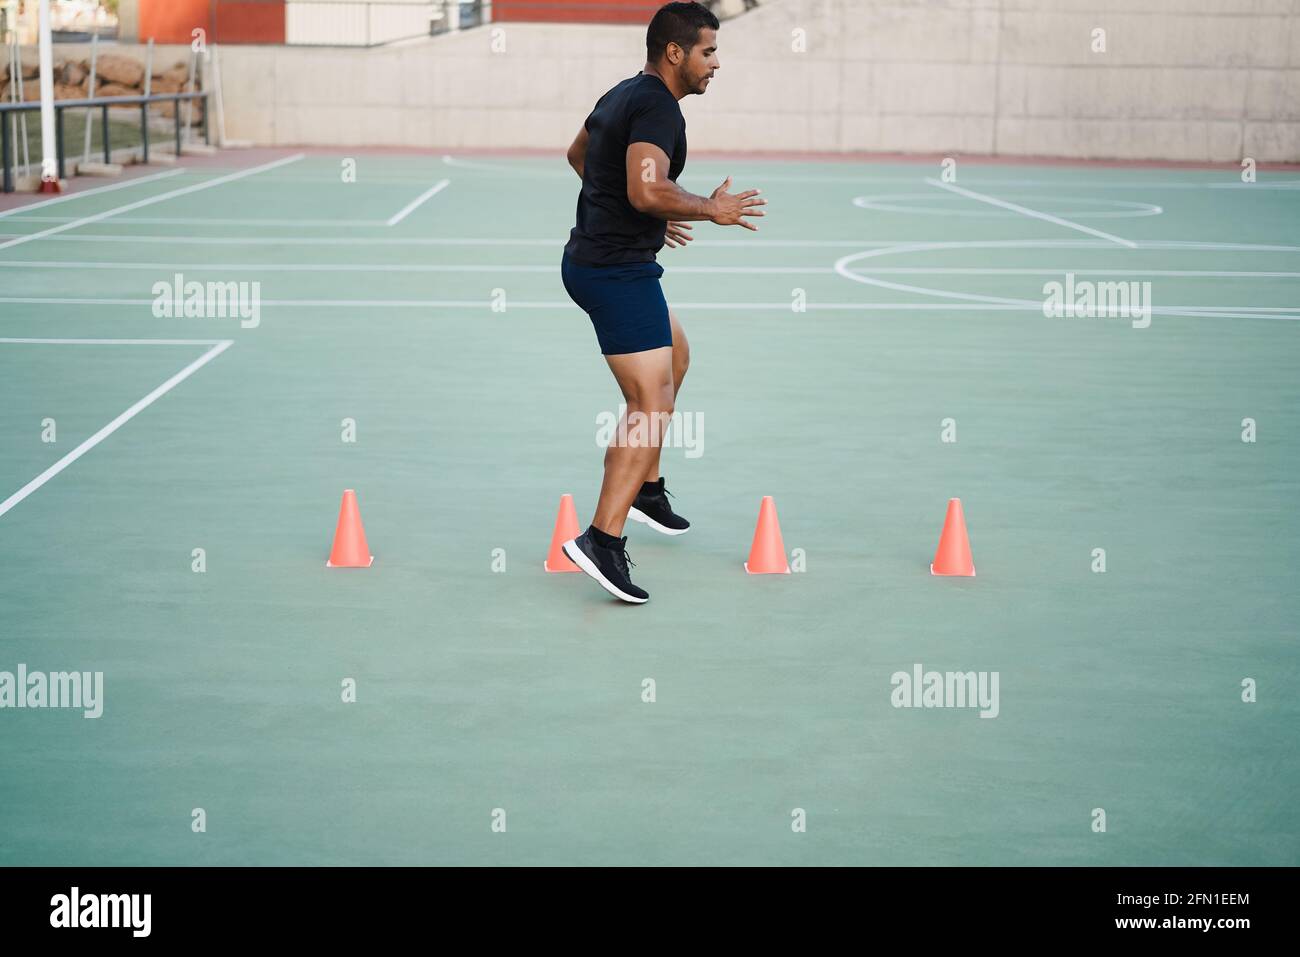 Hispanic man doing speed and agility cone drills workout session outdoors - Focus on man face Stock Photo